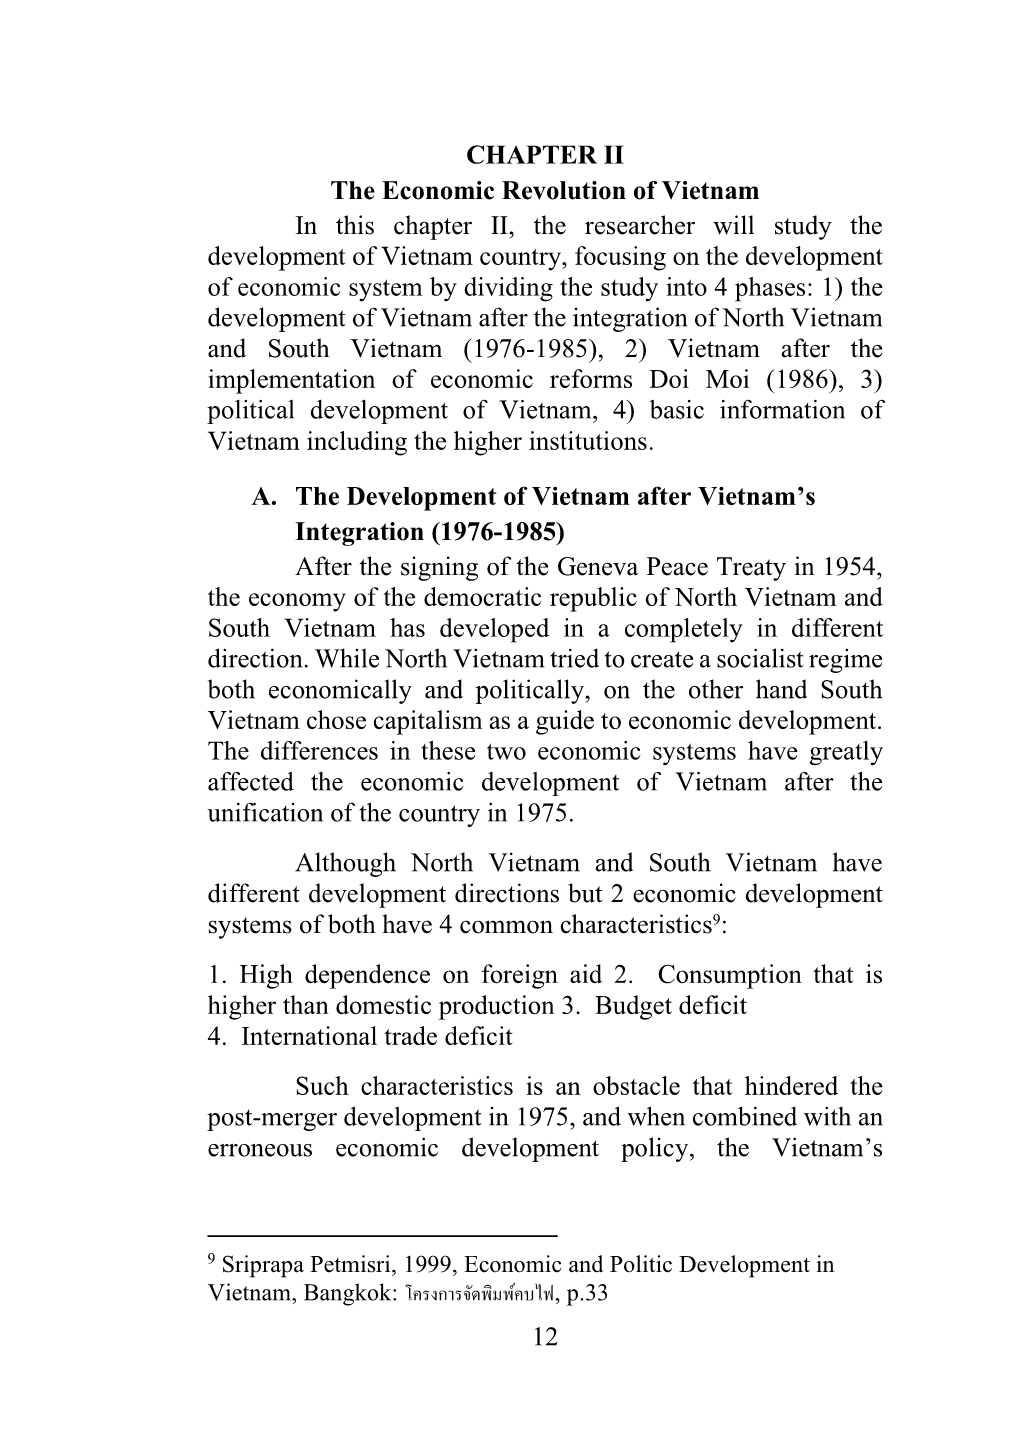 12 CHAPTER II the Economic Revolution of Vietnam in This Chapter II, the Researcher Will Study the Development of Vietnam Countr